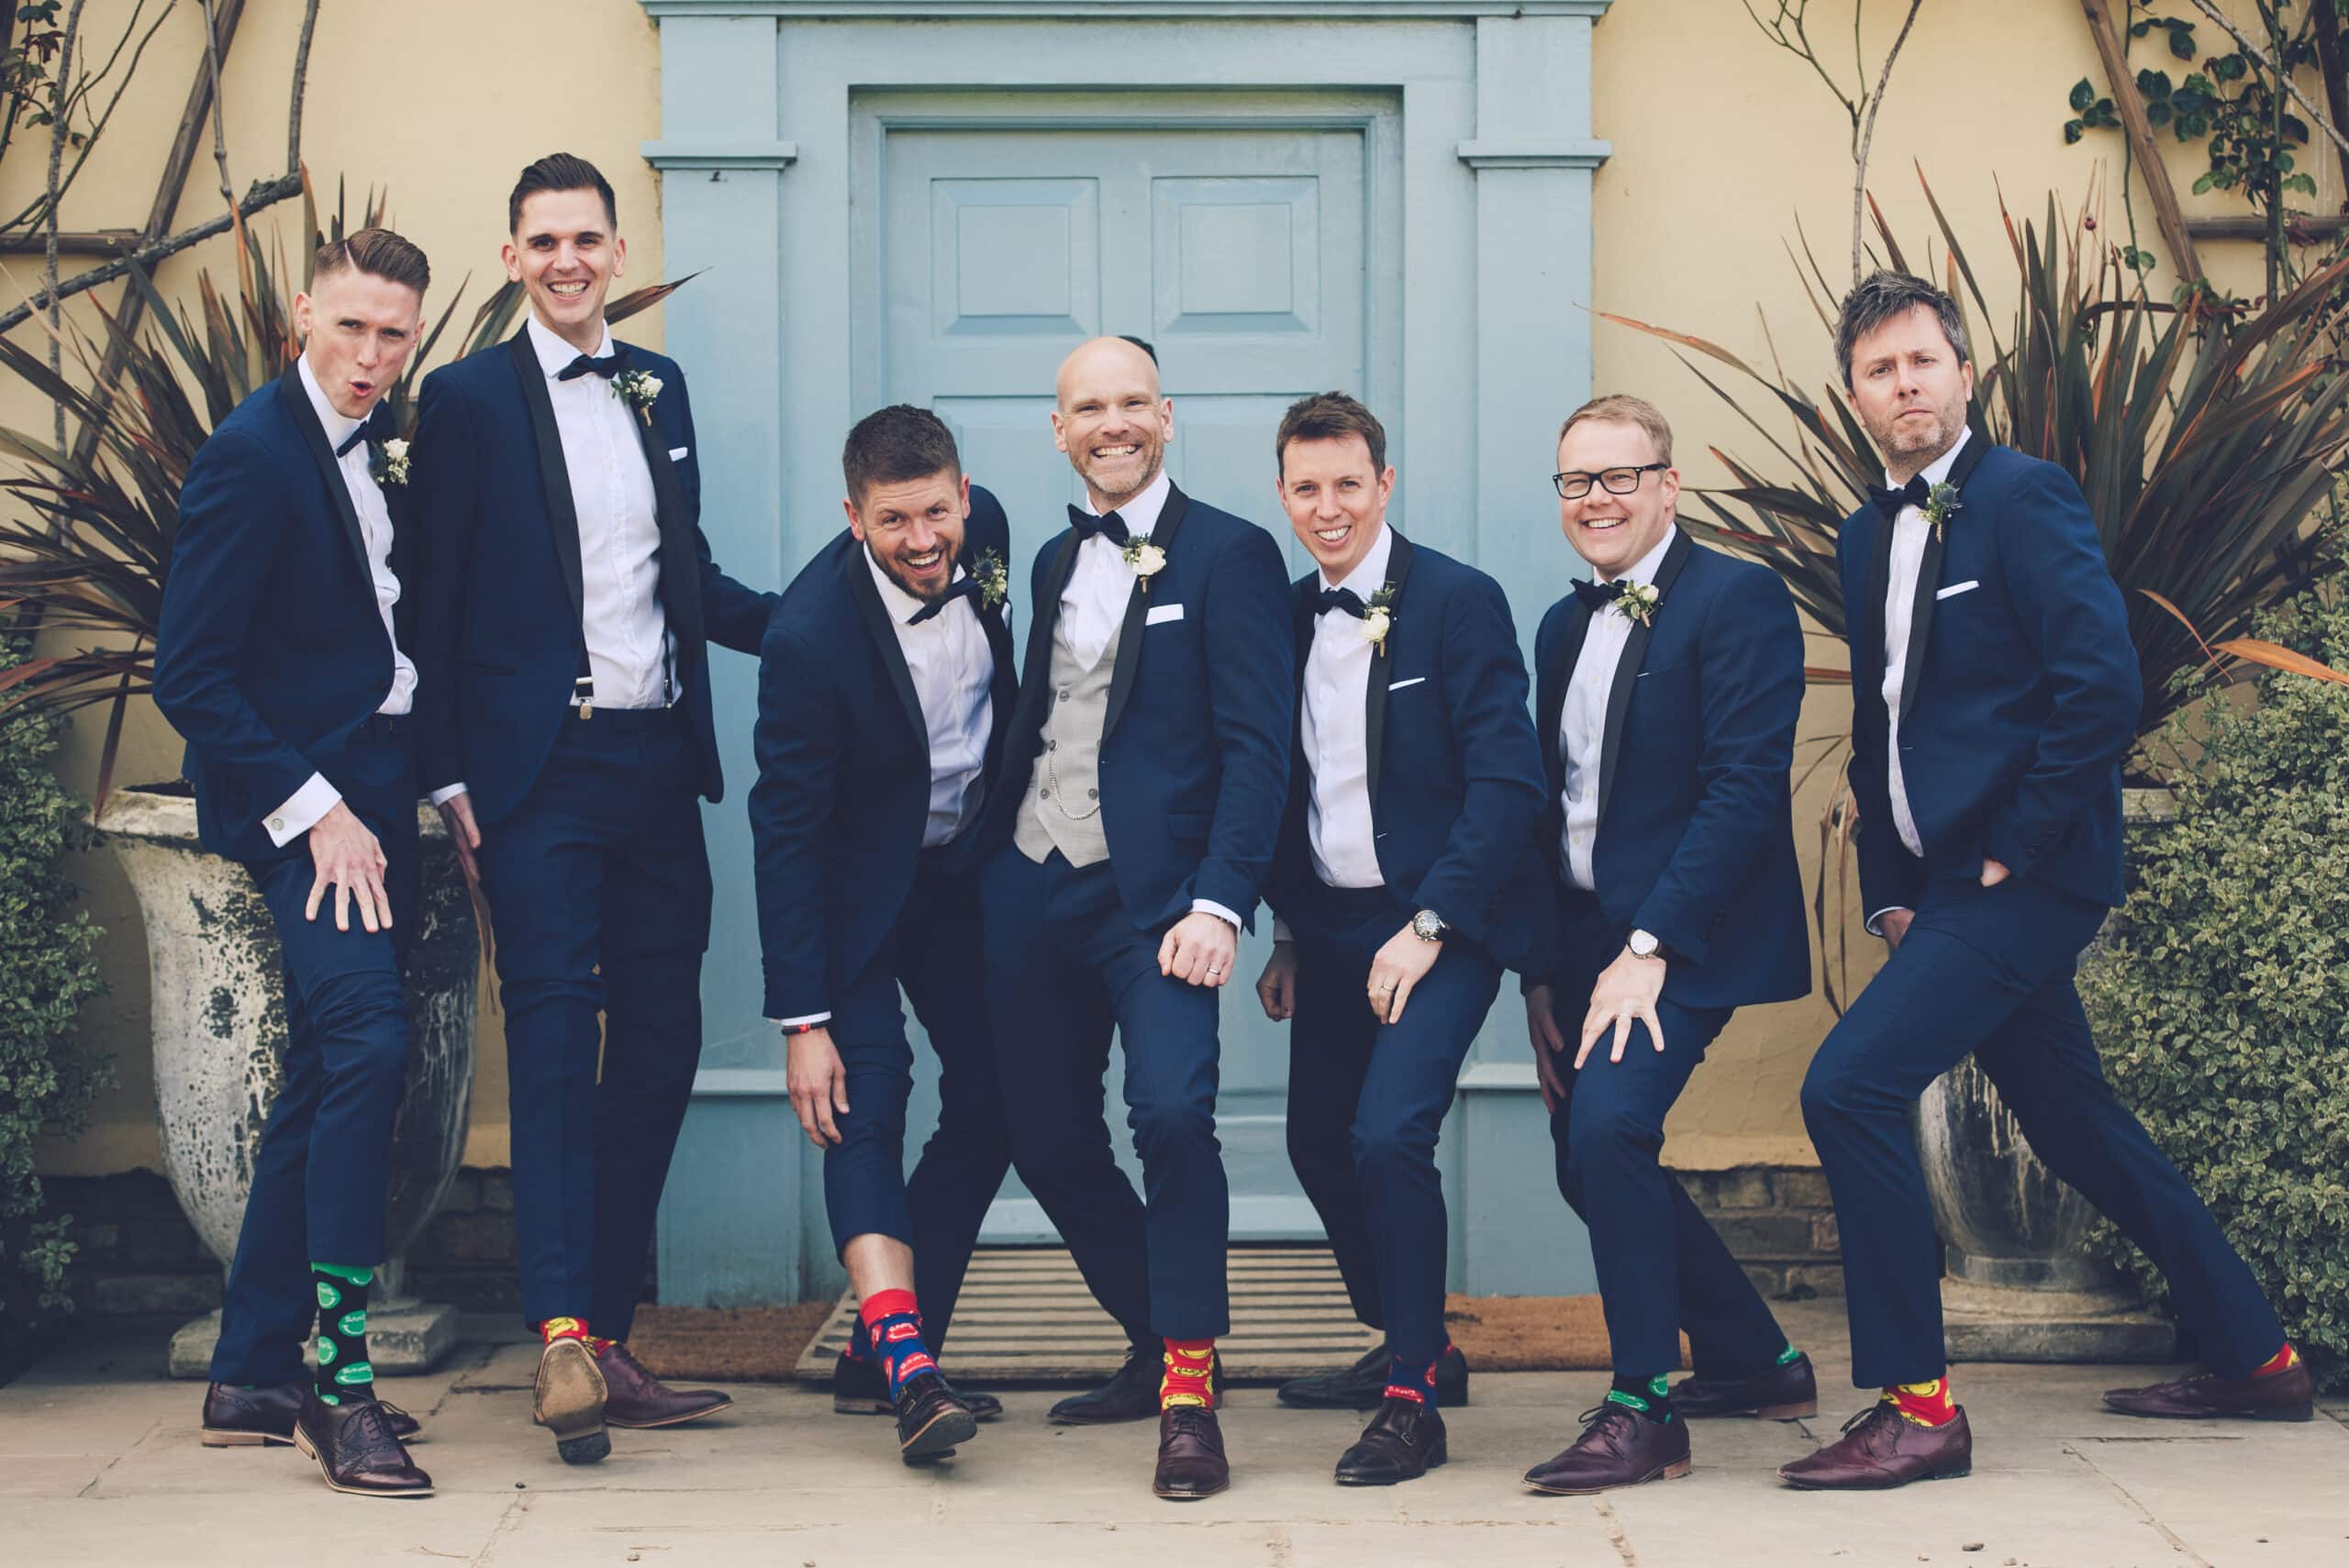 Groom and Groomsmen on wedding day show off colourful socks 